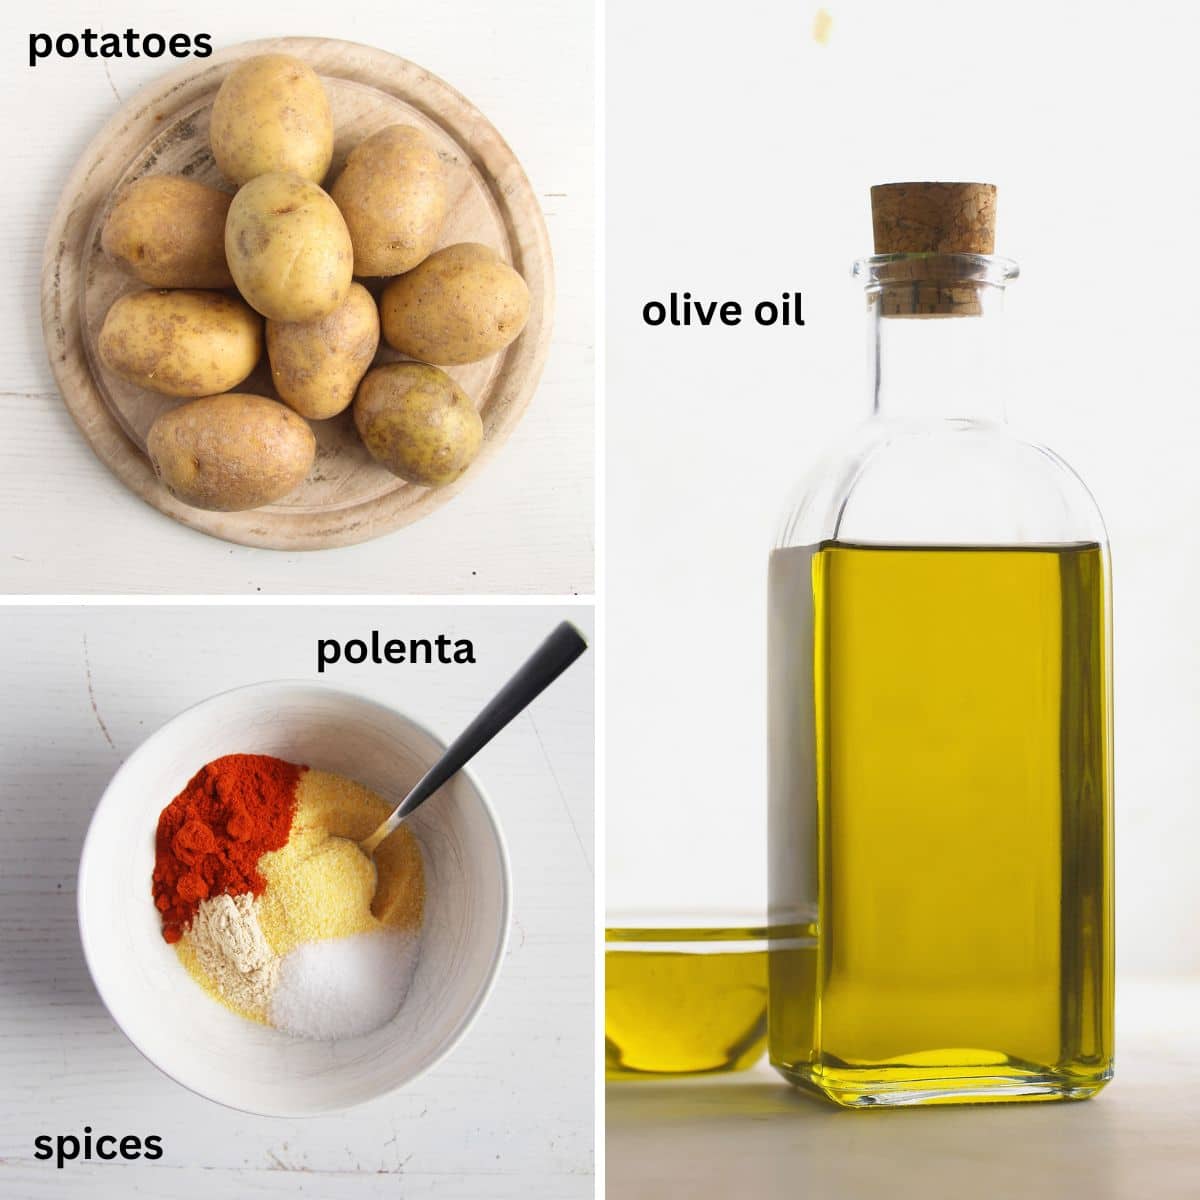 collage of three pictures showing potatoes, spices, polenta and olive oil.